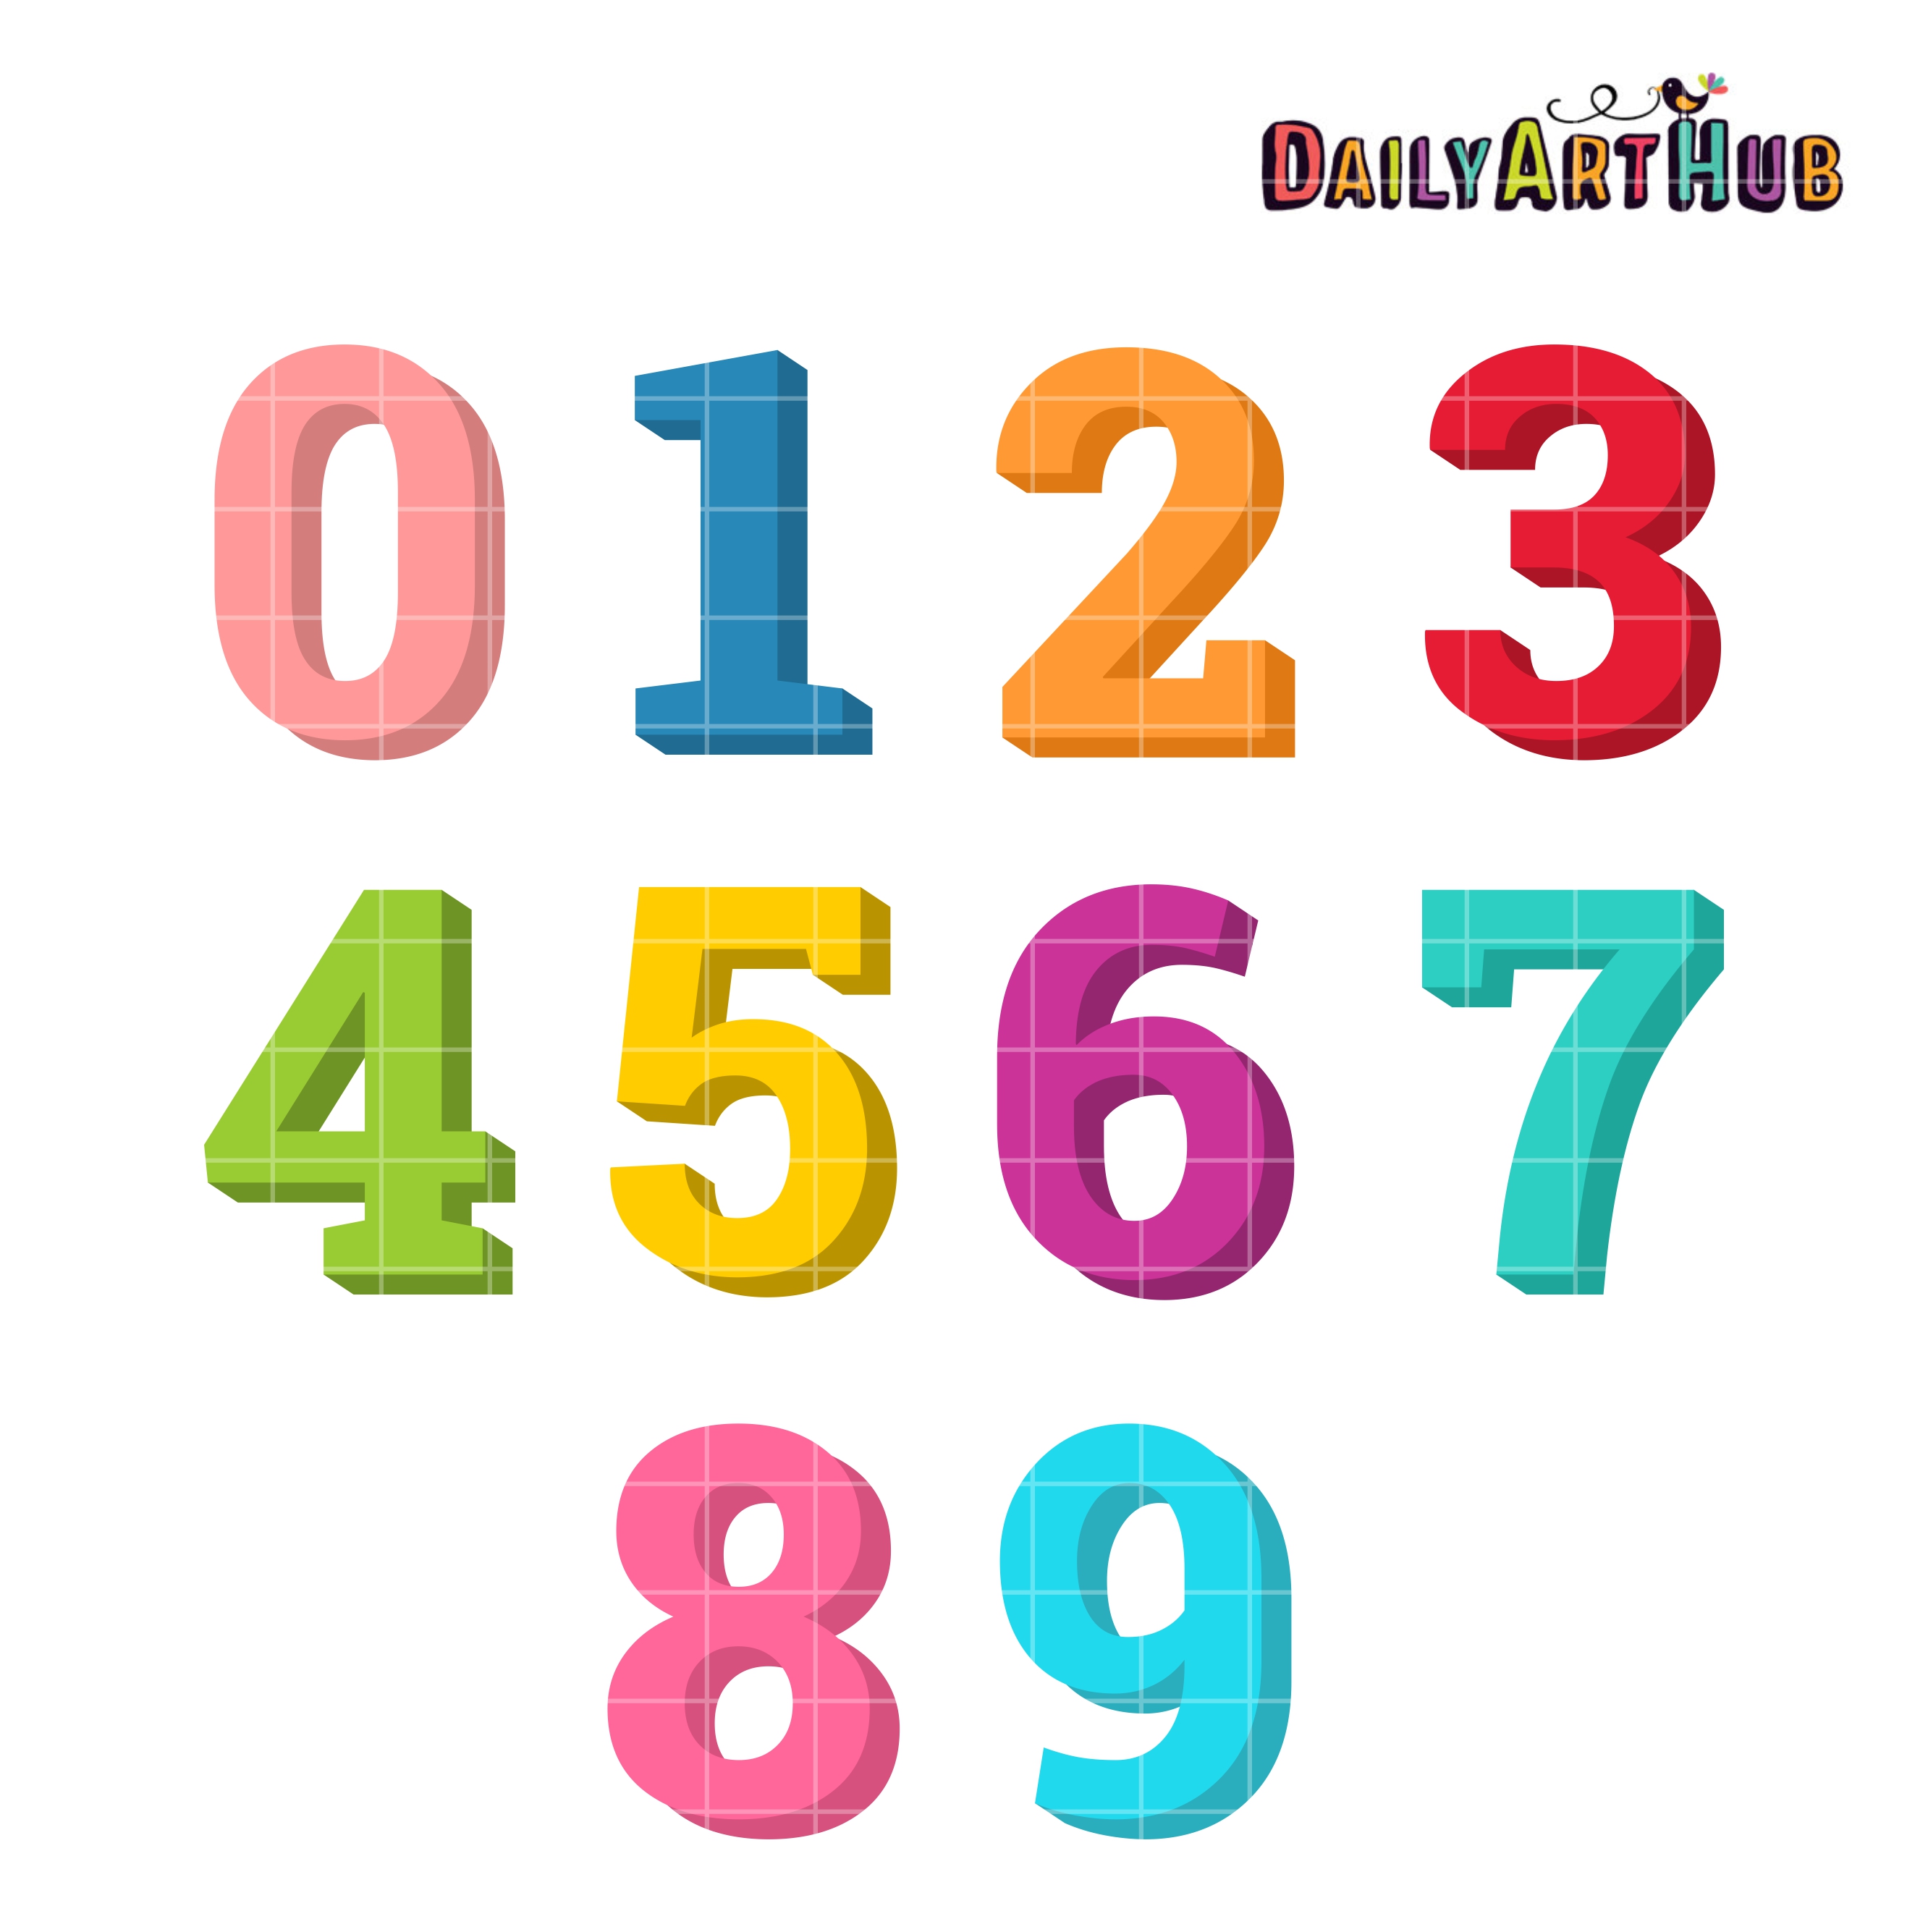 Download 3d Numbers Clip Art Set Daily Art Hub Free Clip Art Everyday